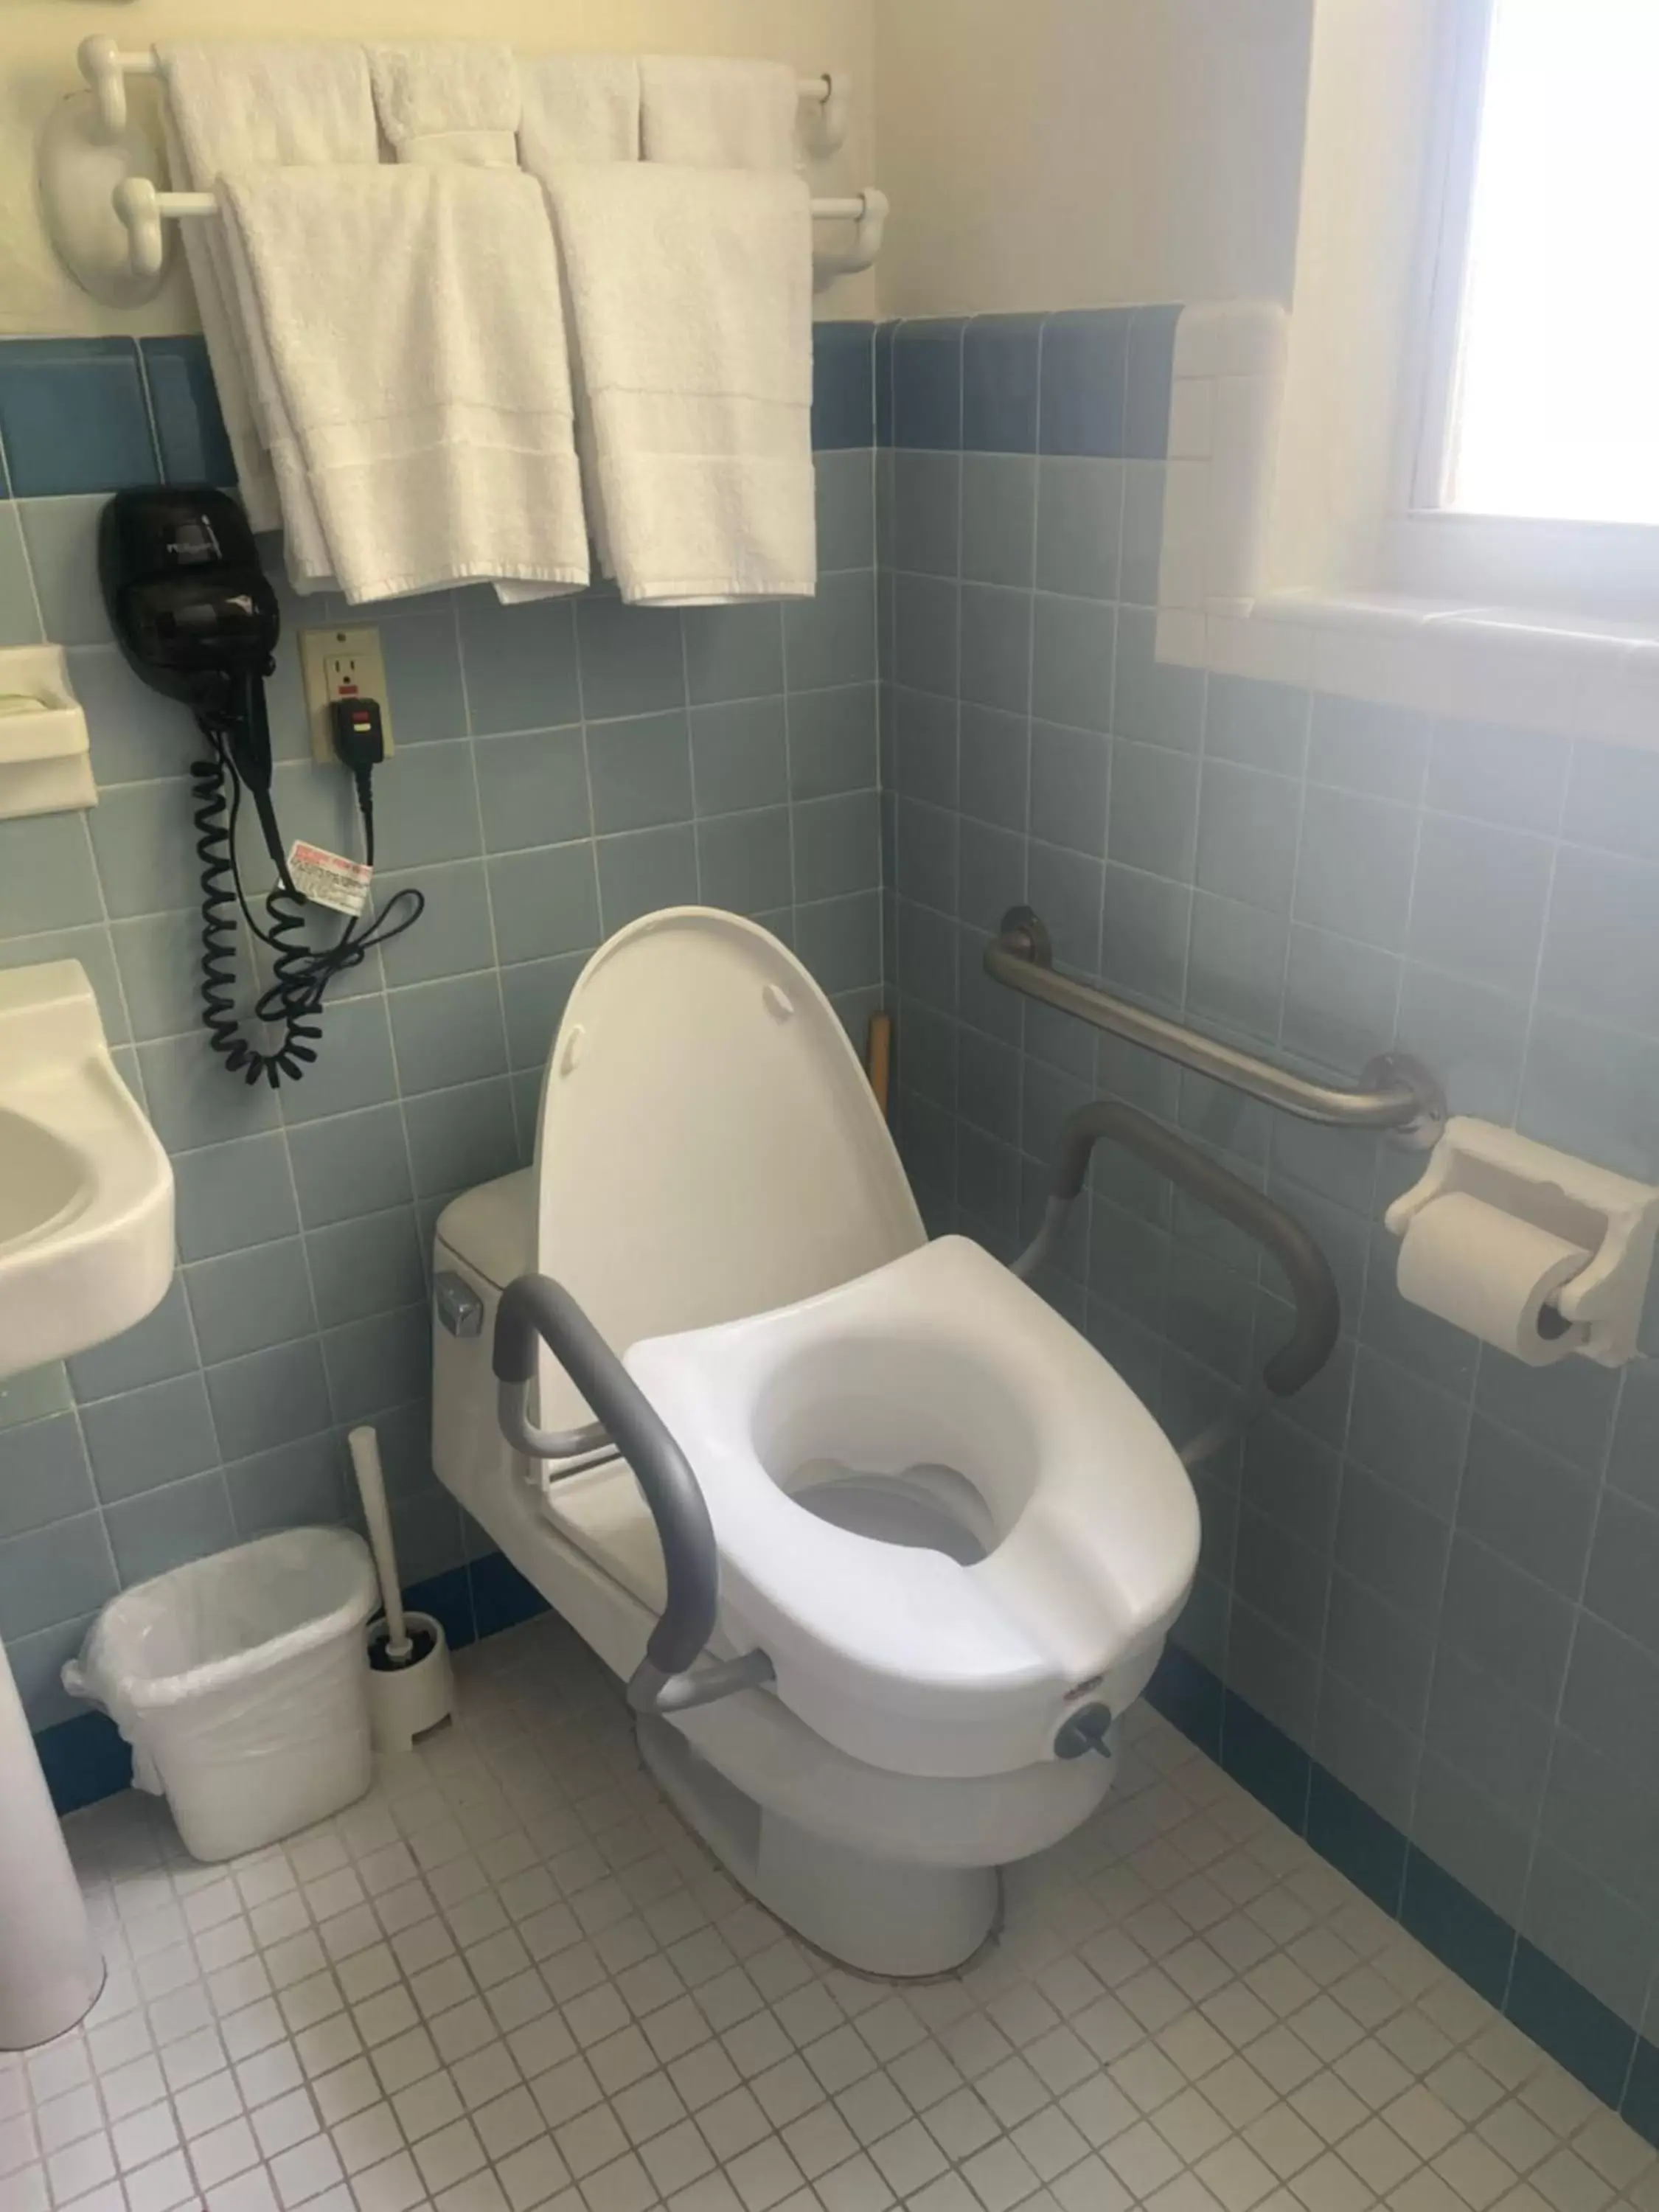 Facility for disabled guests, Bathroom in Ocean Drive Villas